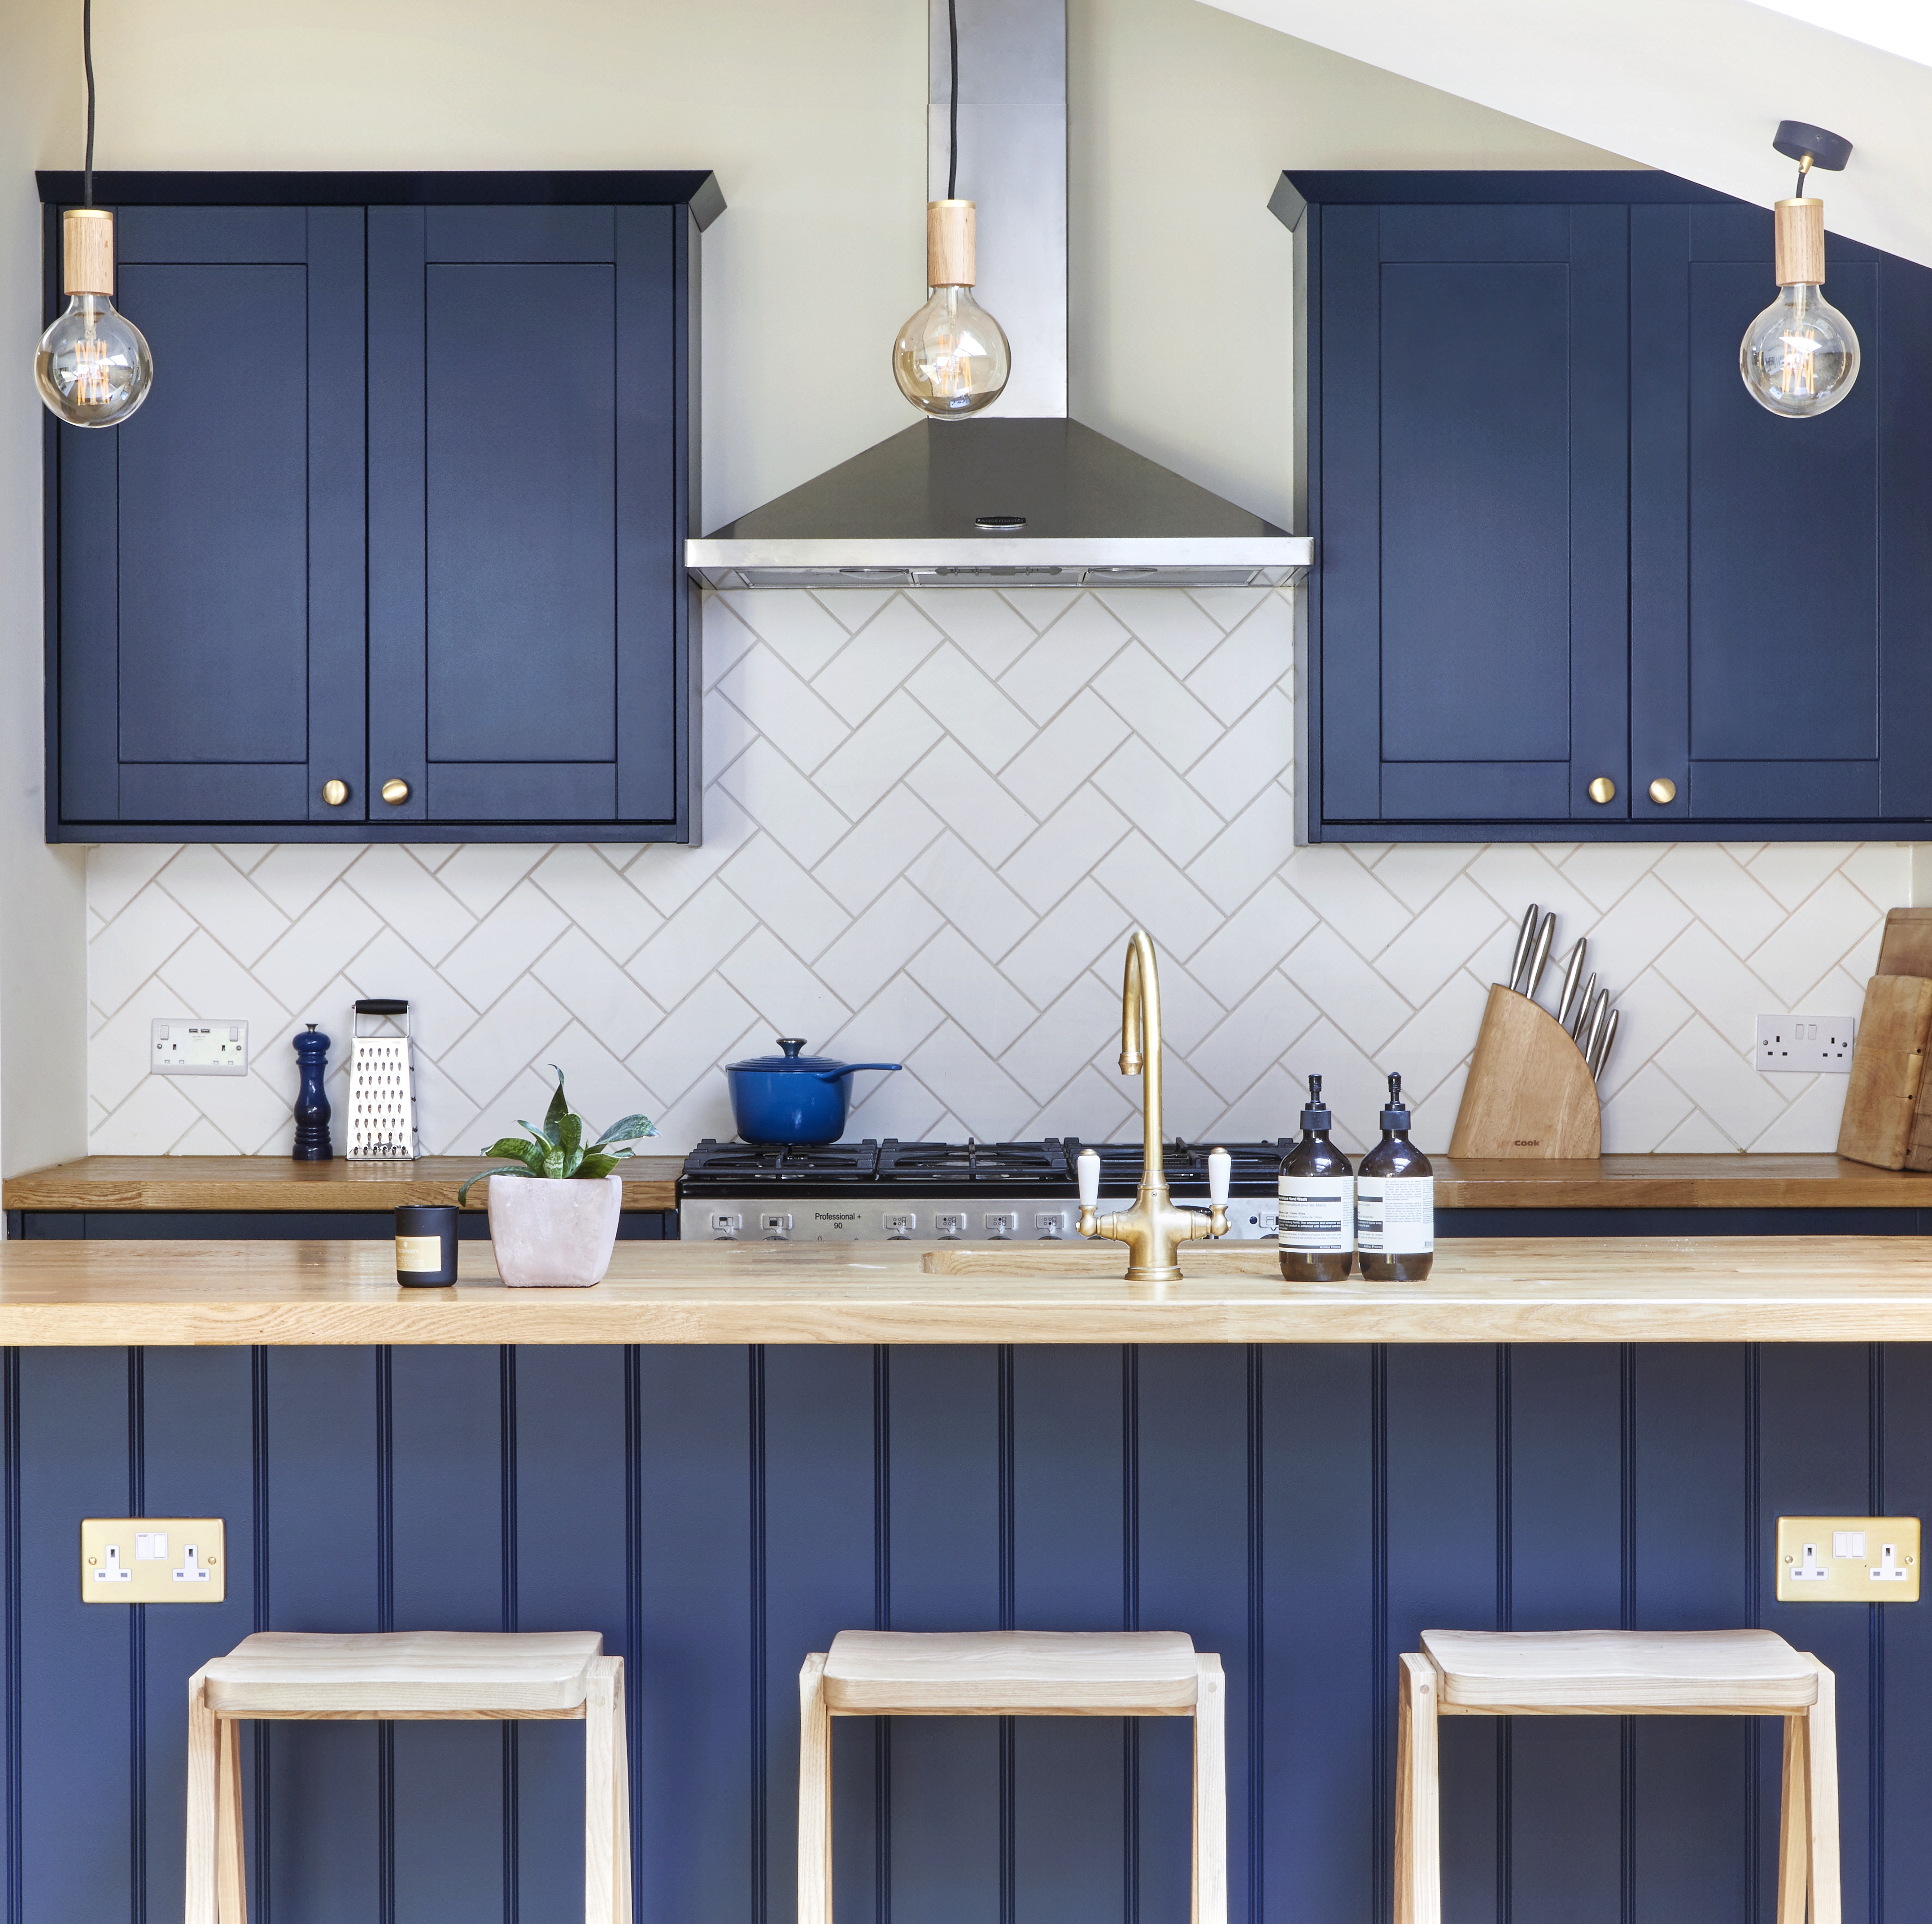 Bespoke farmhouse style kitchen with dark blue shaker cabinets made for West London client by Holland Street Kitchens.